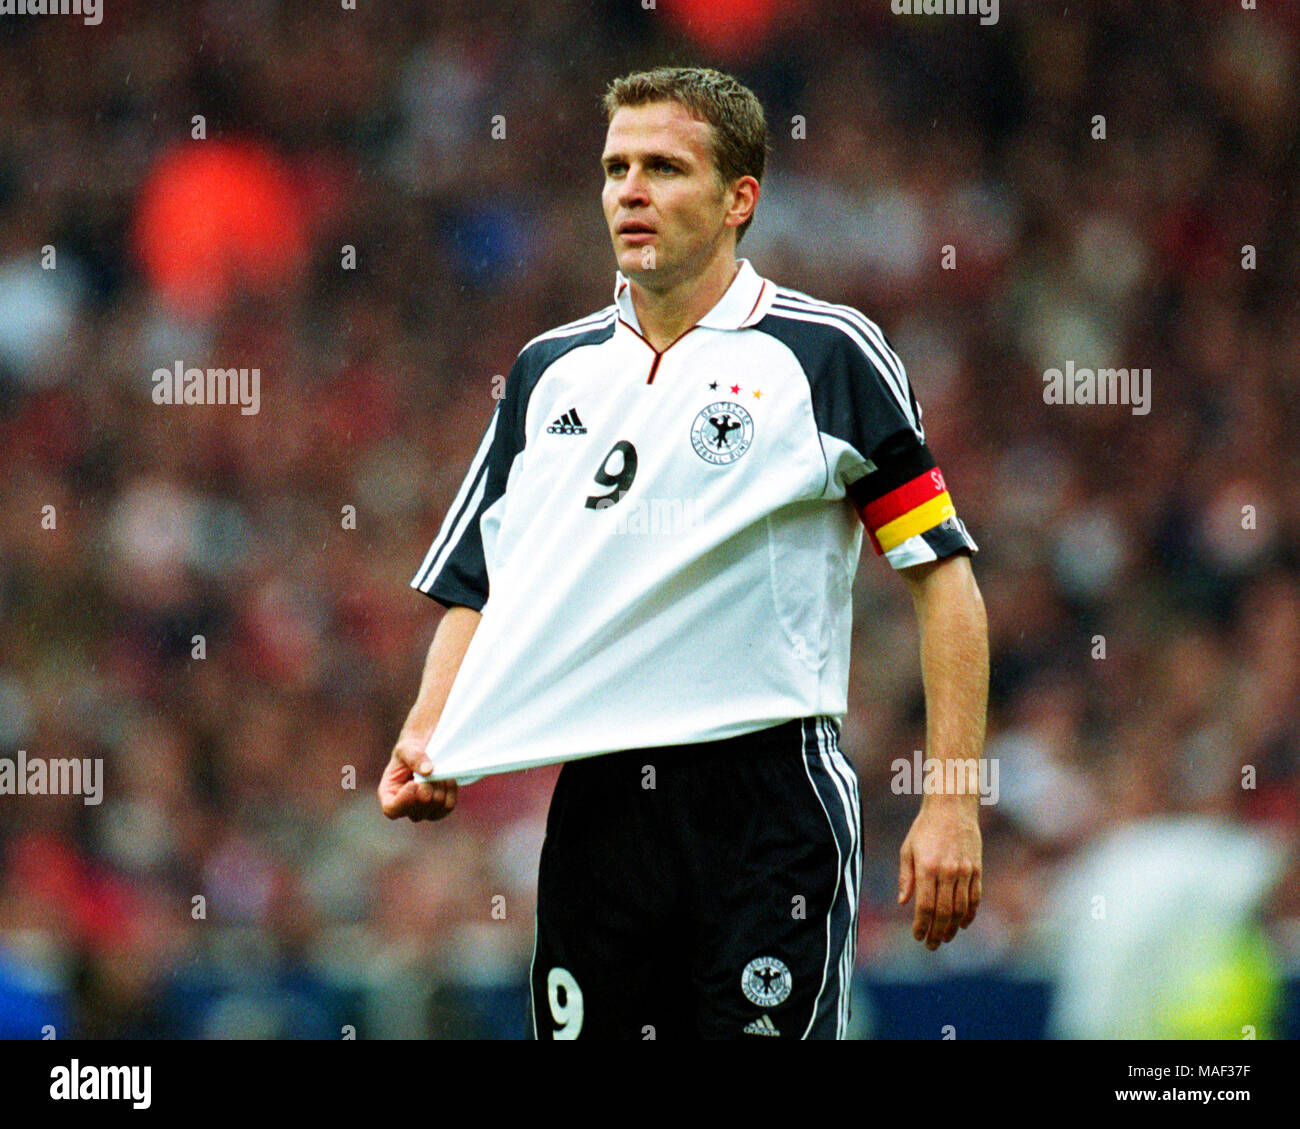 Wembley Stadium London England 7 10 2000 The Final Match At Wembley Football World Cup 2002 Qualifier England Vs Germany 0 1 Oliver Bierhoff Stock Photo Alamy